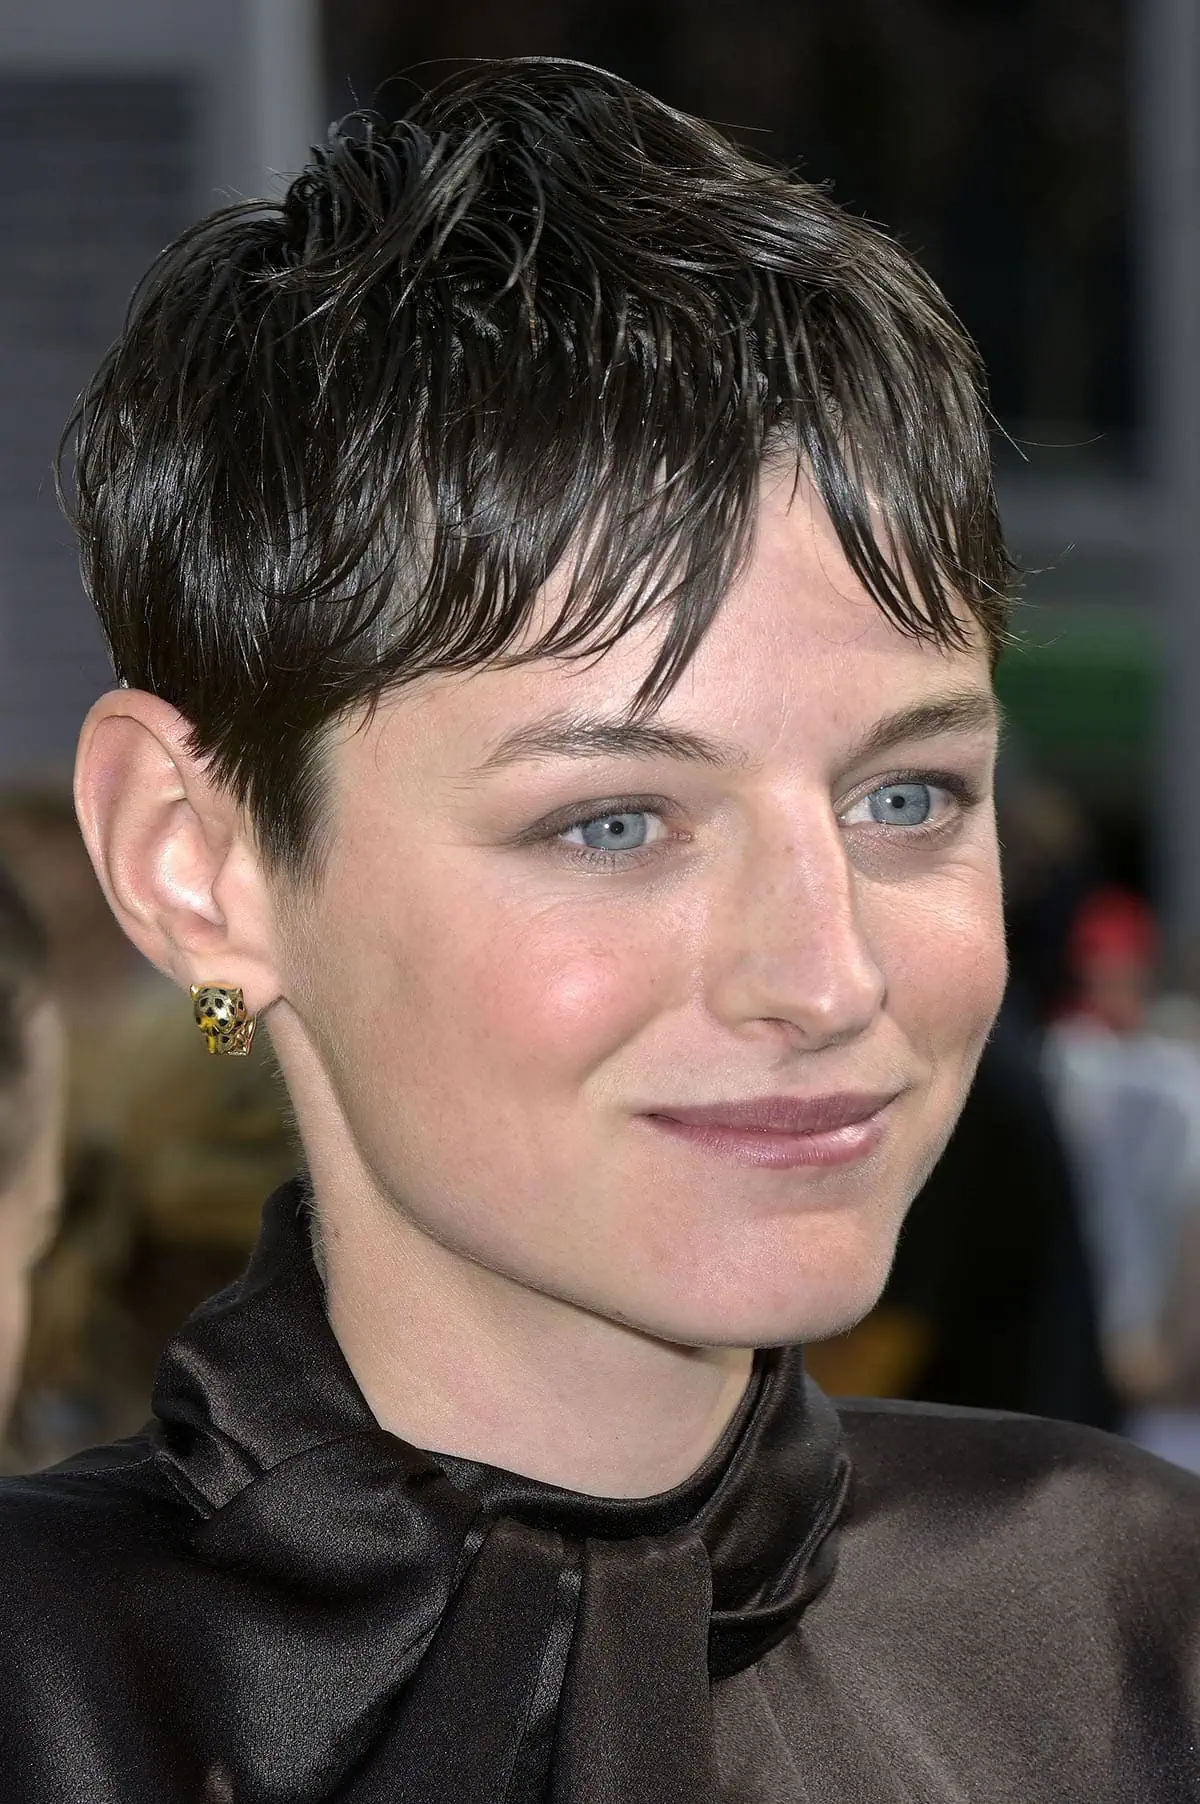 Emma Corrin mirrors their supervillain persona by arranging their pixie hair in a messy, wet-look style and sporting minimal makeup